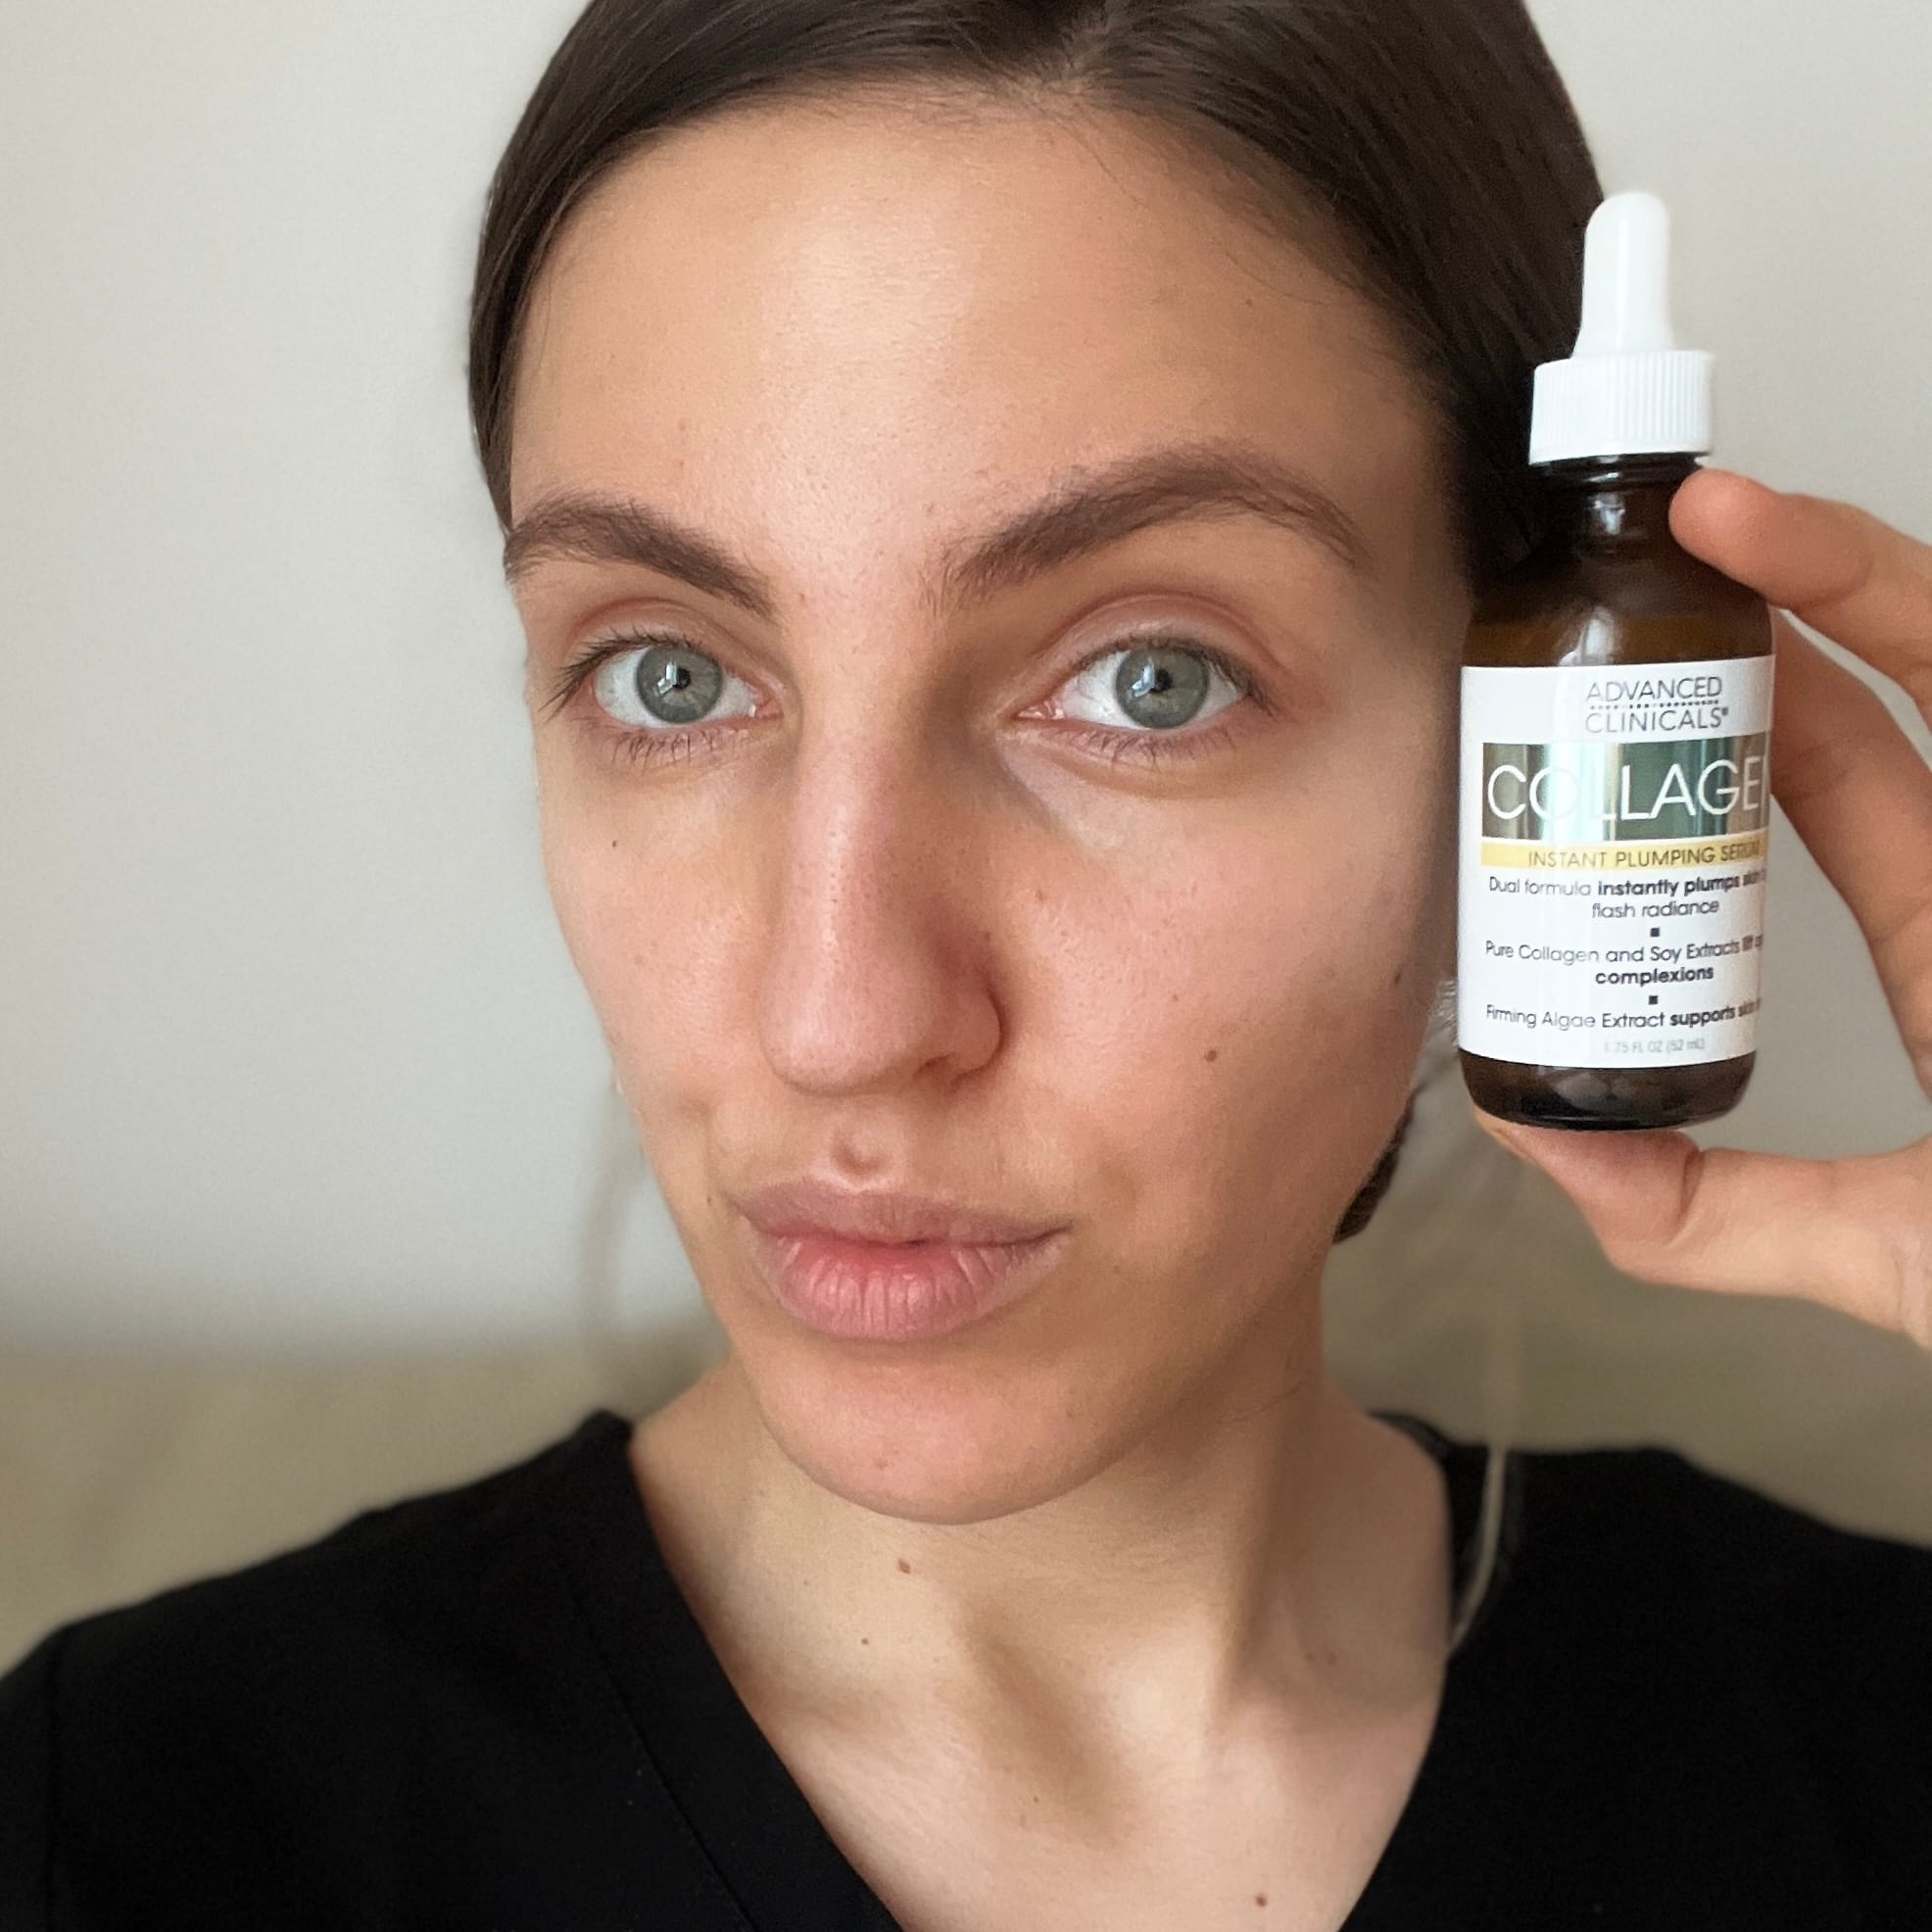 Advanced Clinicals Collagen Serum: A Product Review